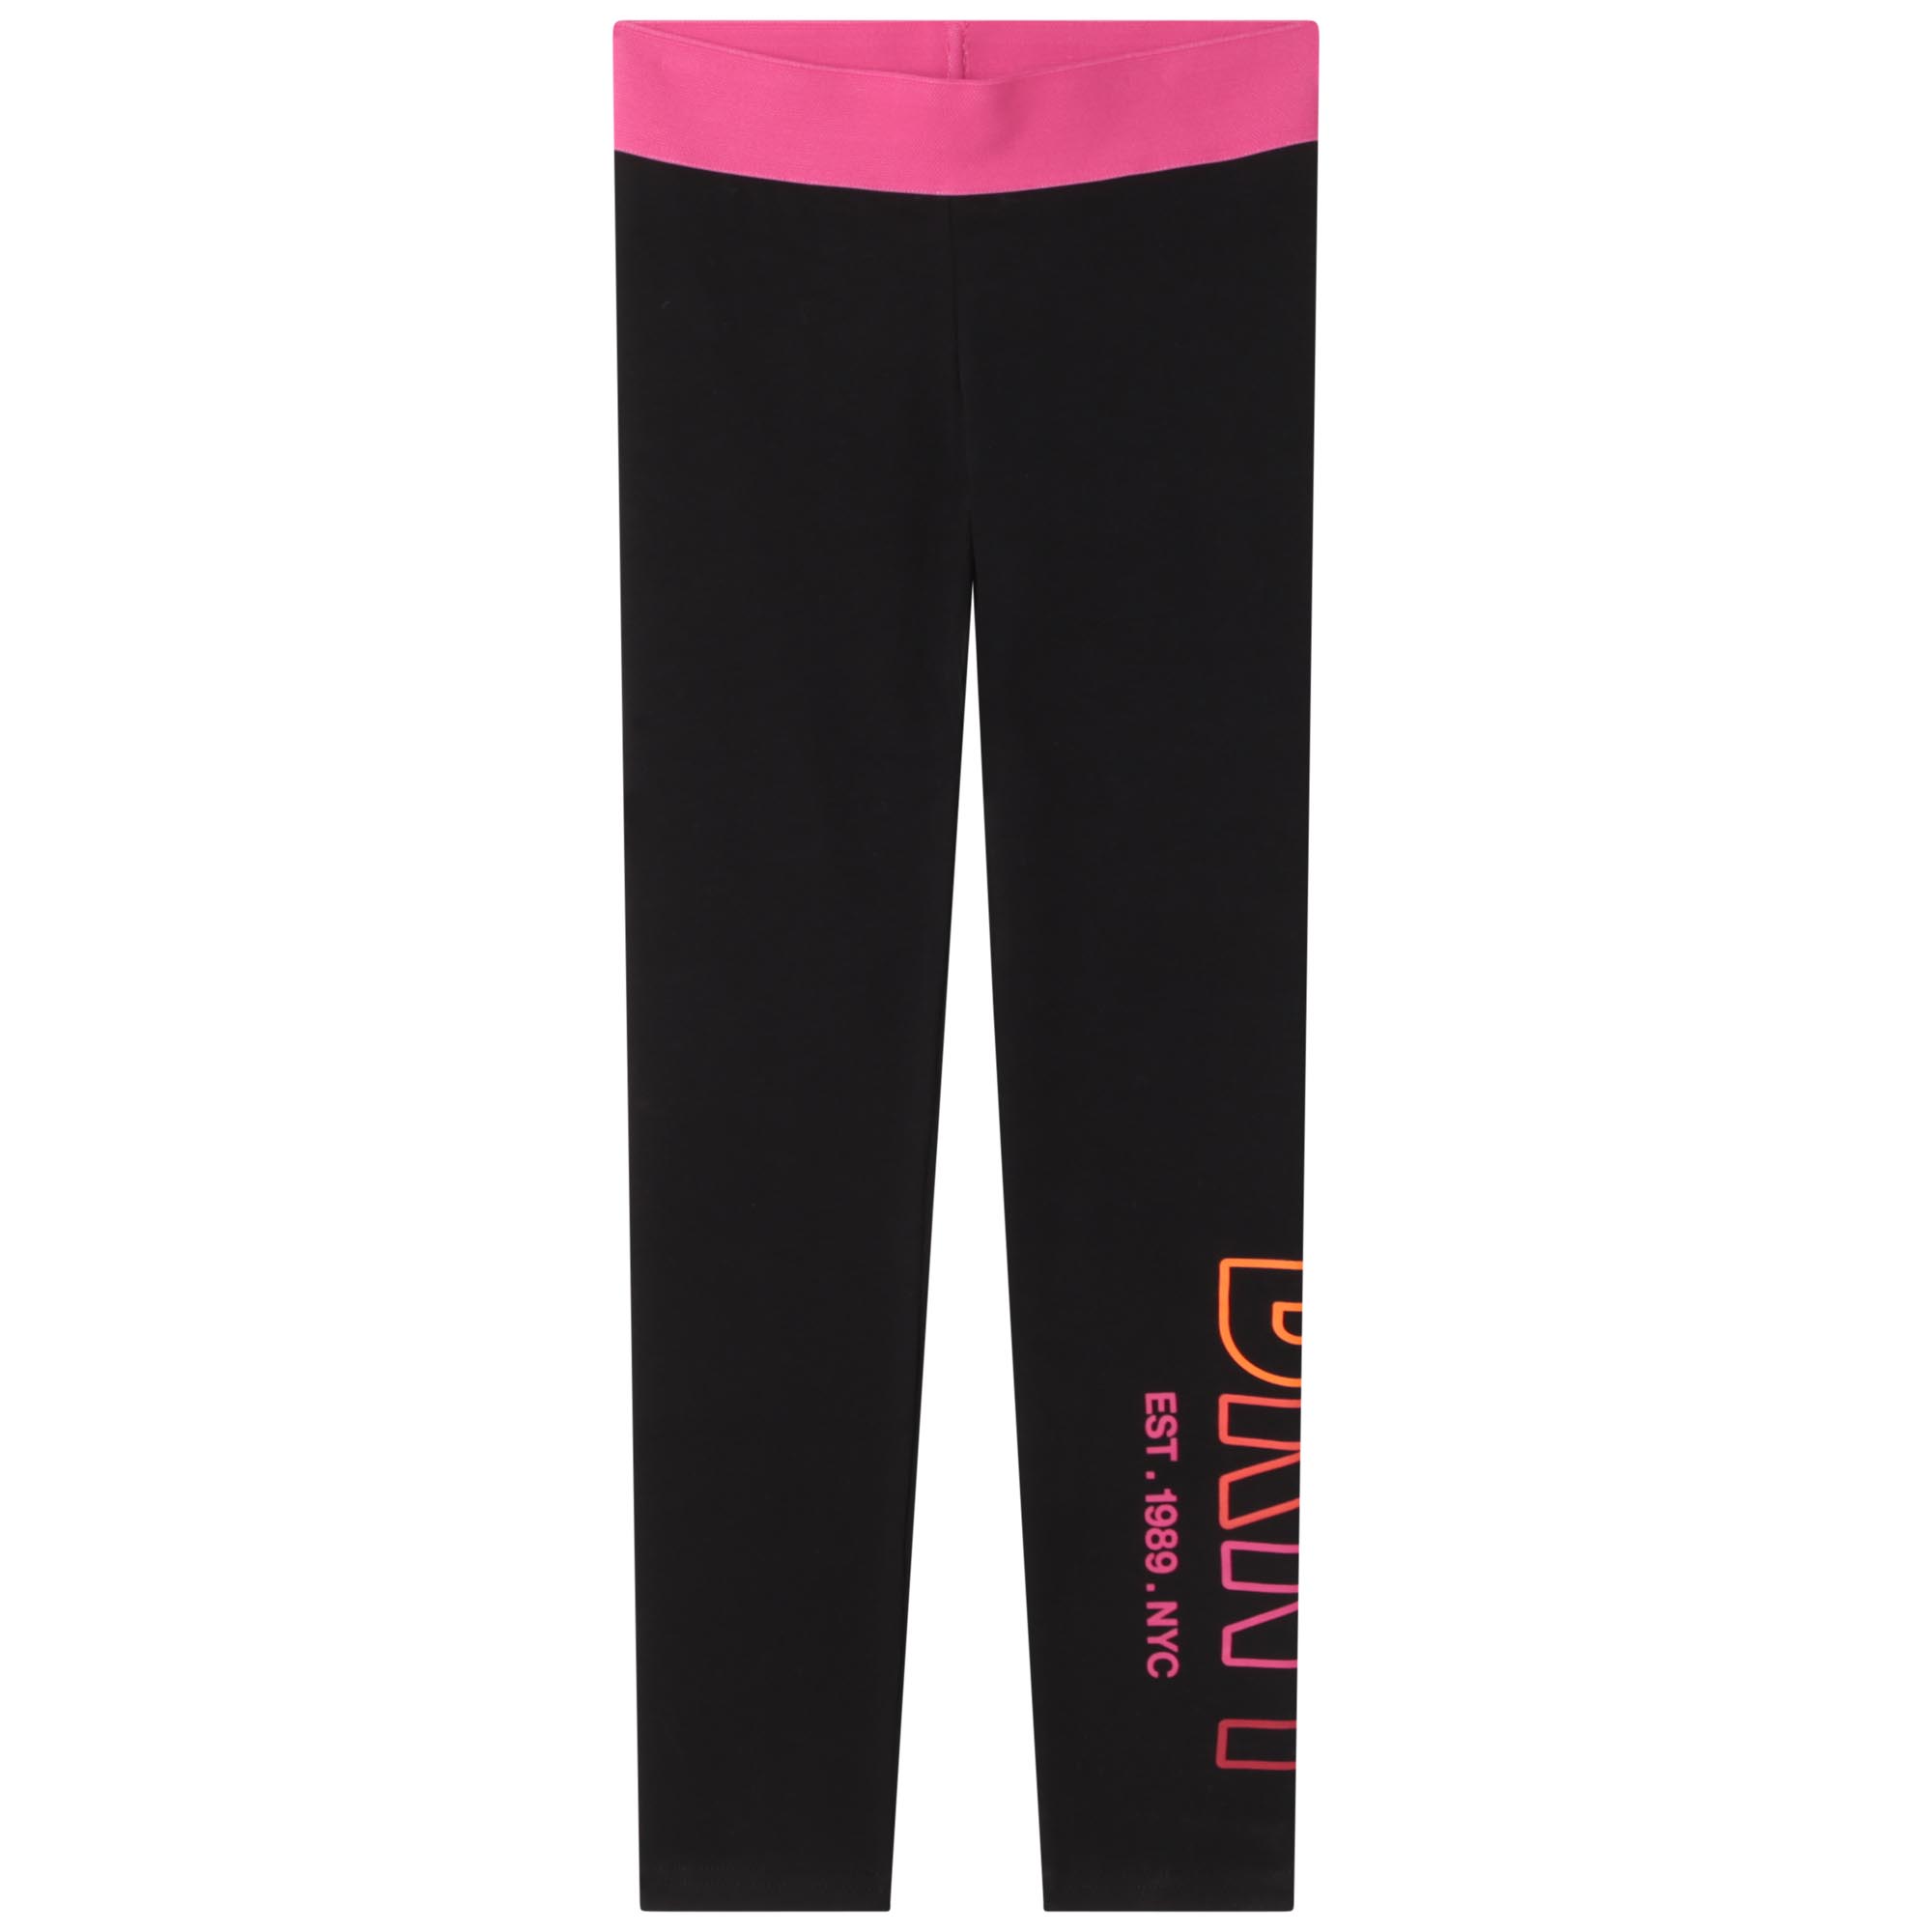 DKNY black leggings with pink waist band